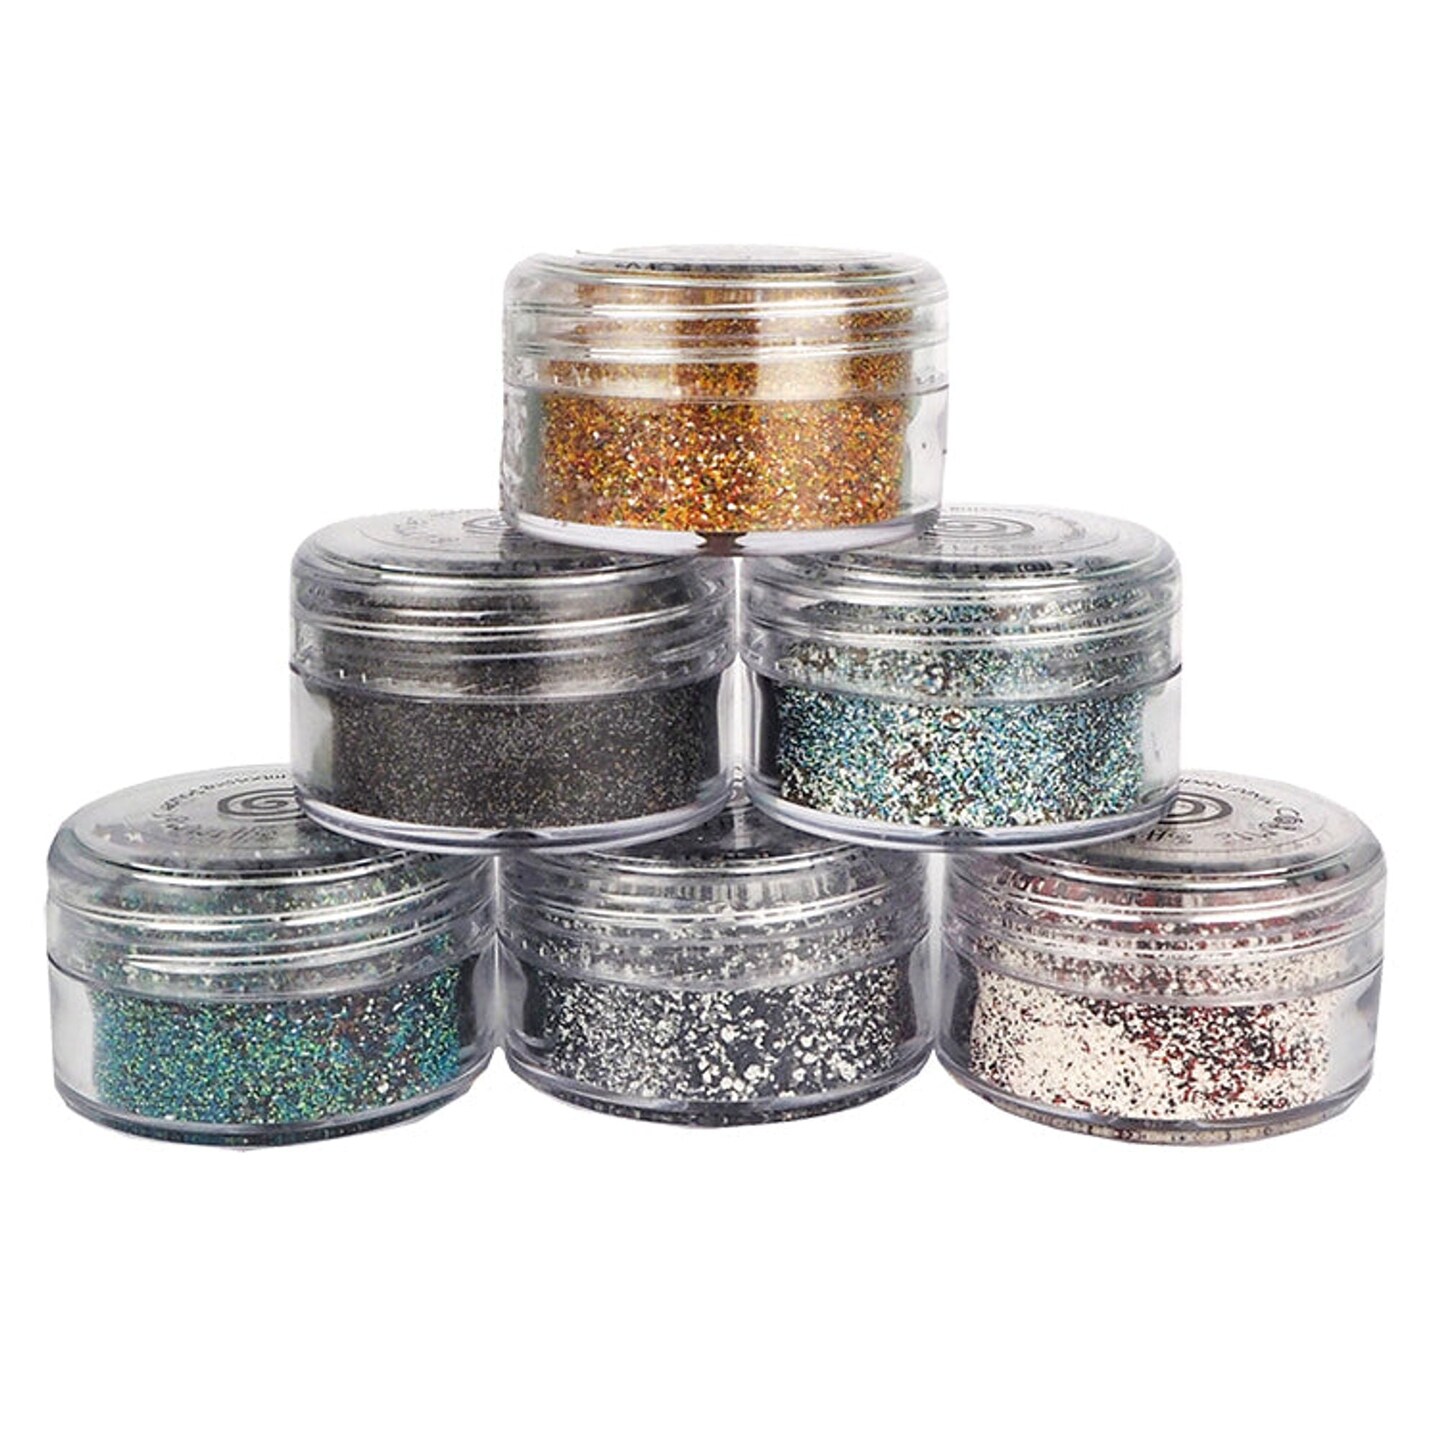 Cosmic Shimmer  Mixed Media Embossing Powder - Iron Age